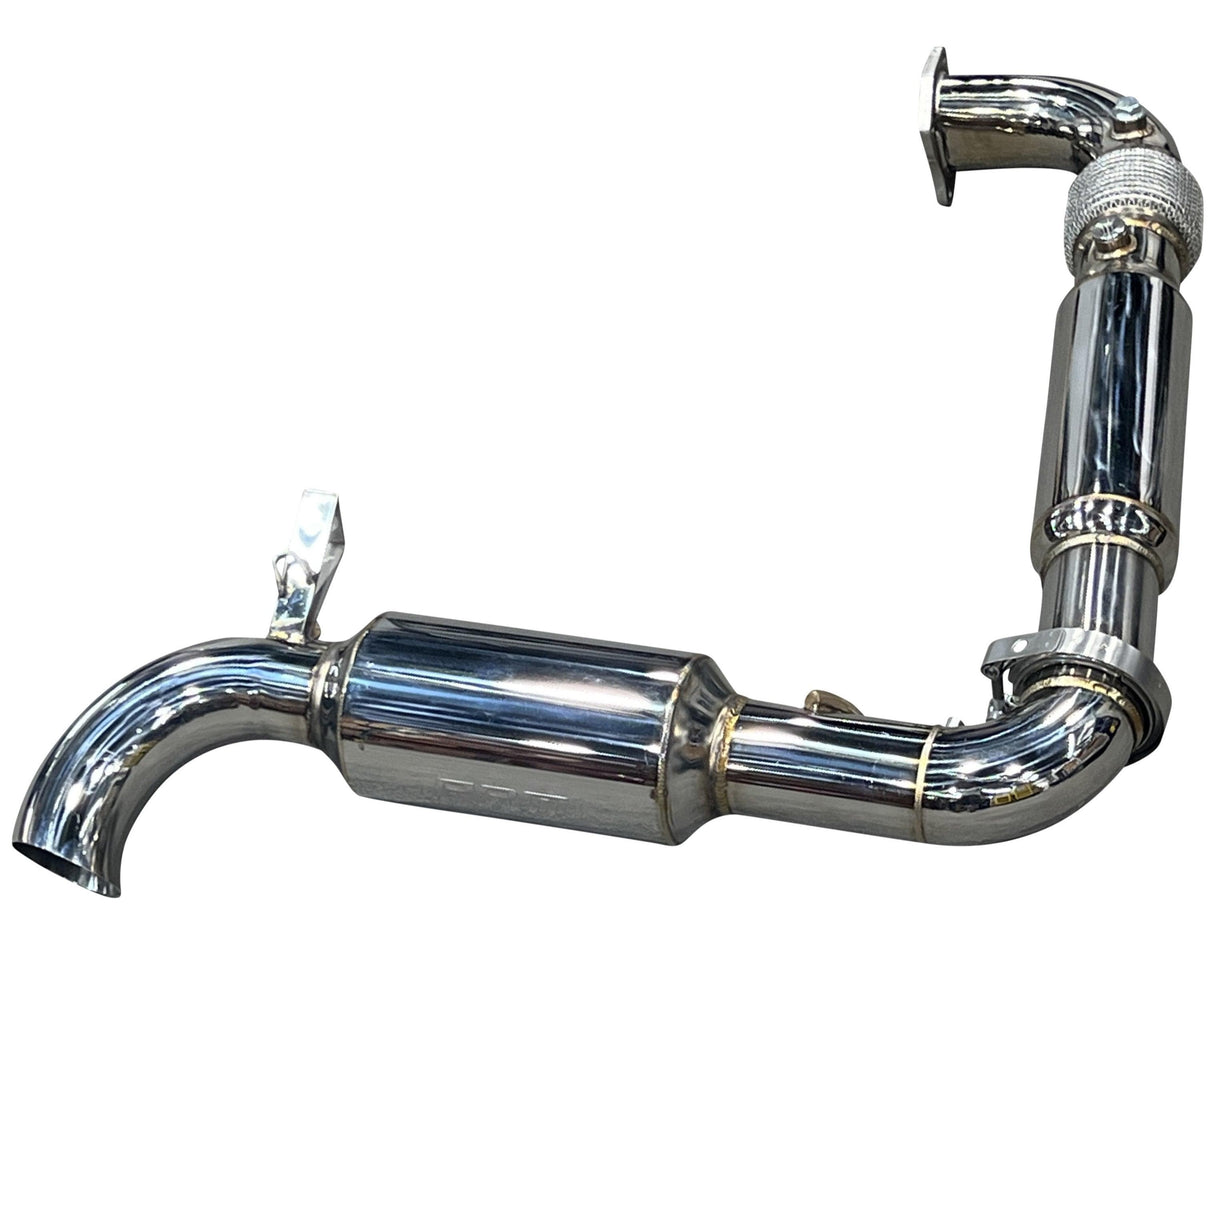 RZR Pro XP & Turbo R FULL 3" Exhaust ~ RPM Monster Core 3" Muffler & Mid Pipe - R1 Industries